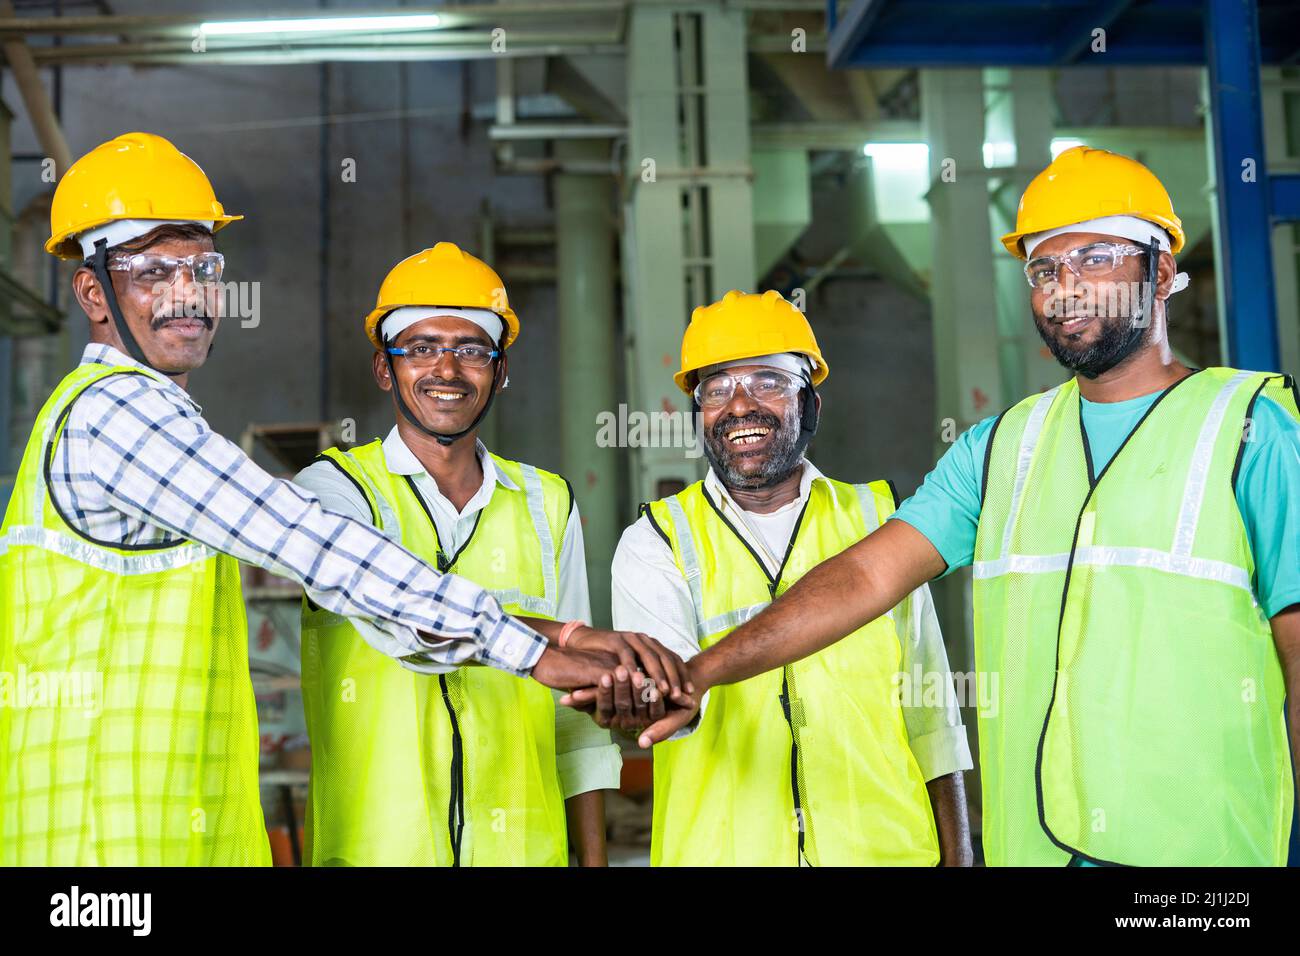 factory workes witj safety hard hat joining hands at workplace - concept of teamwork, cooperation and partnership Stock Photo